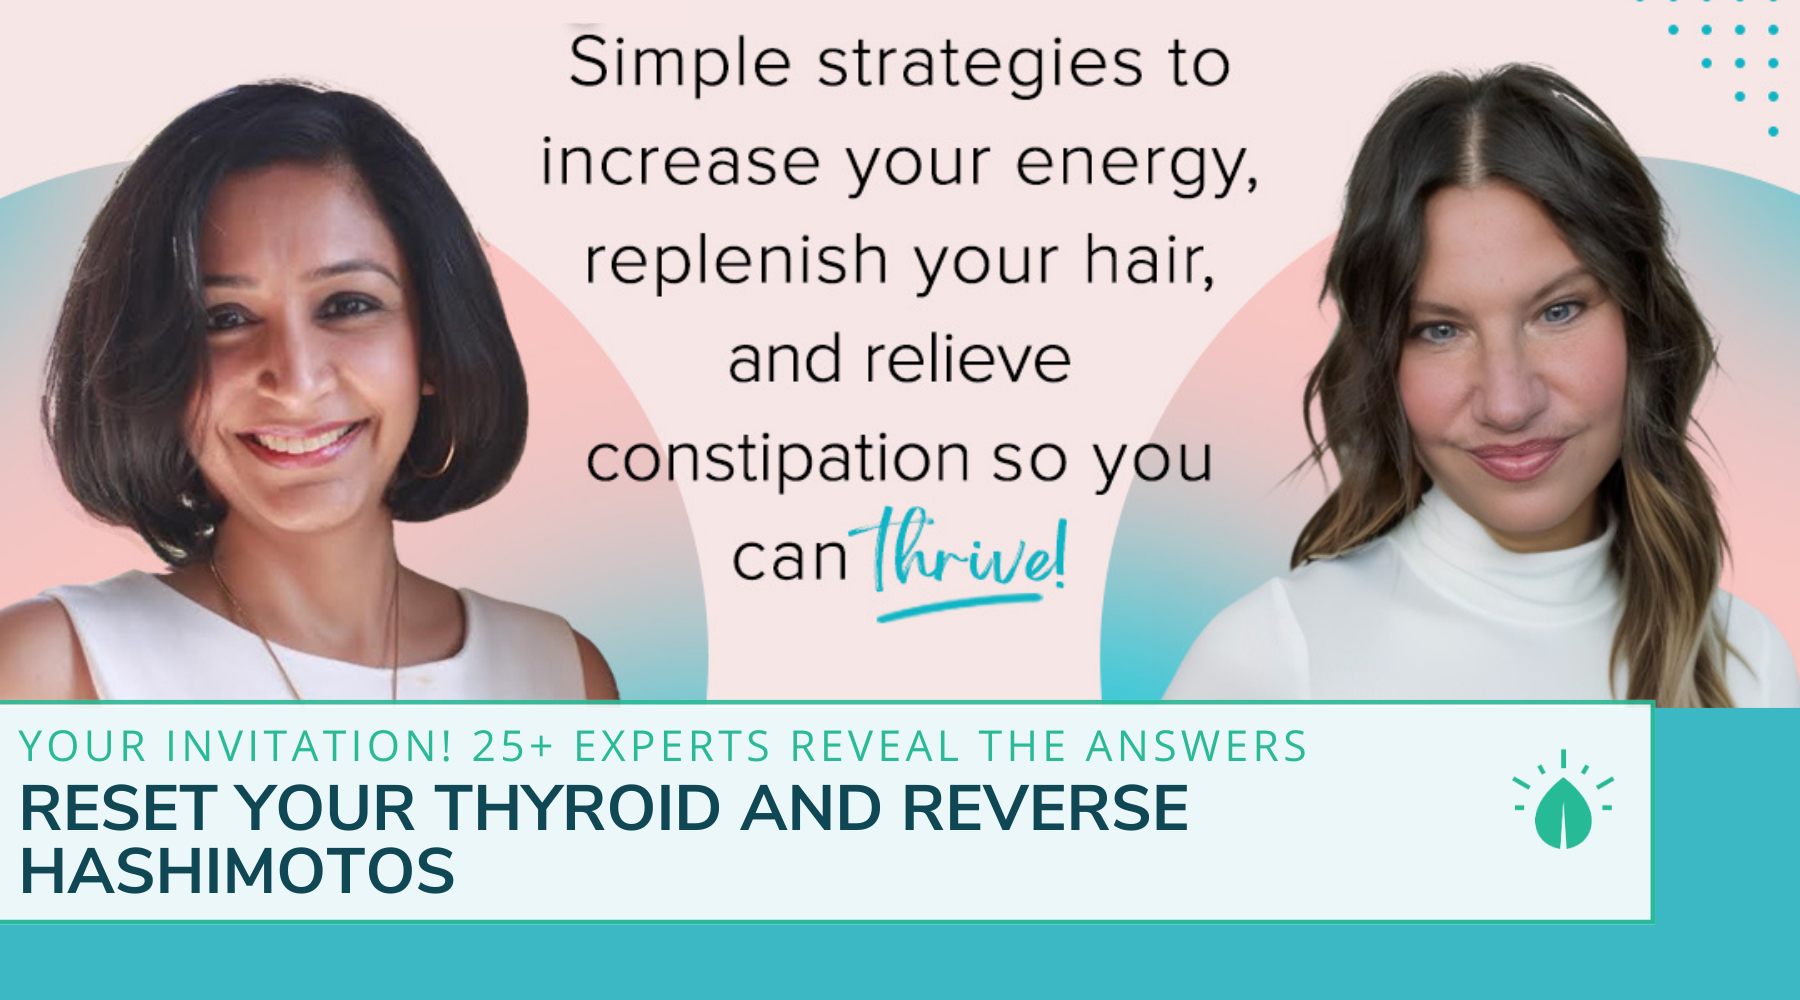 Reset Your Thyroid And Reverse Hashimotos - 25 Experts Reveal The Answers